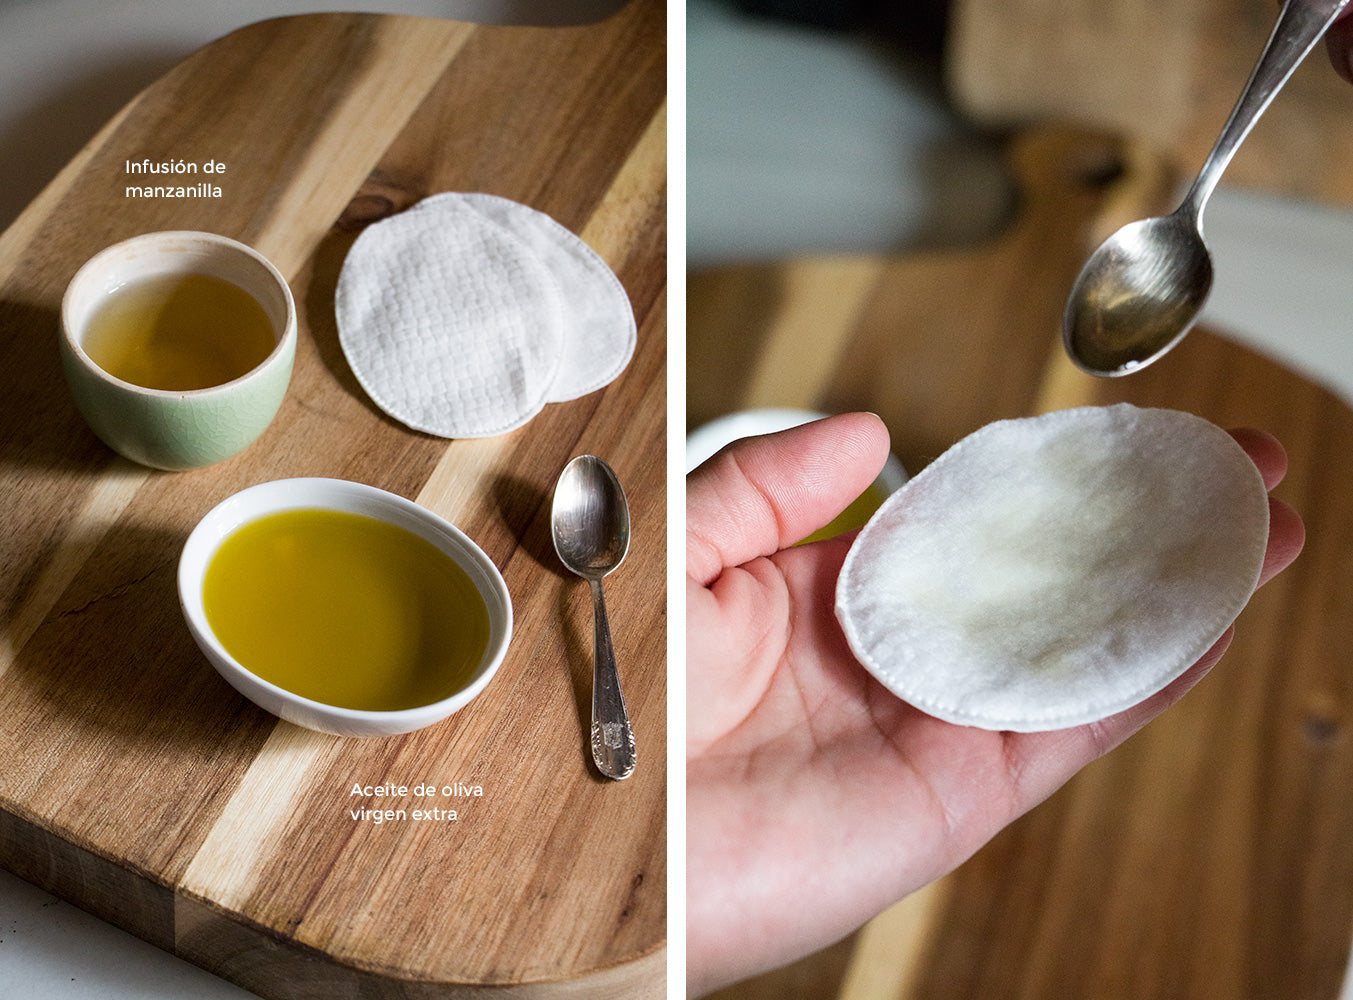 Face cleansing with chamomile and olive oil